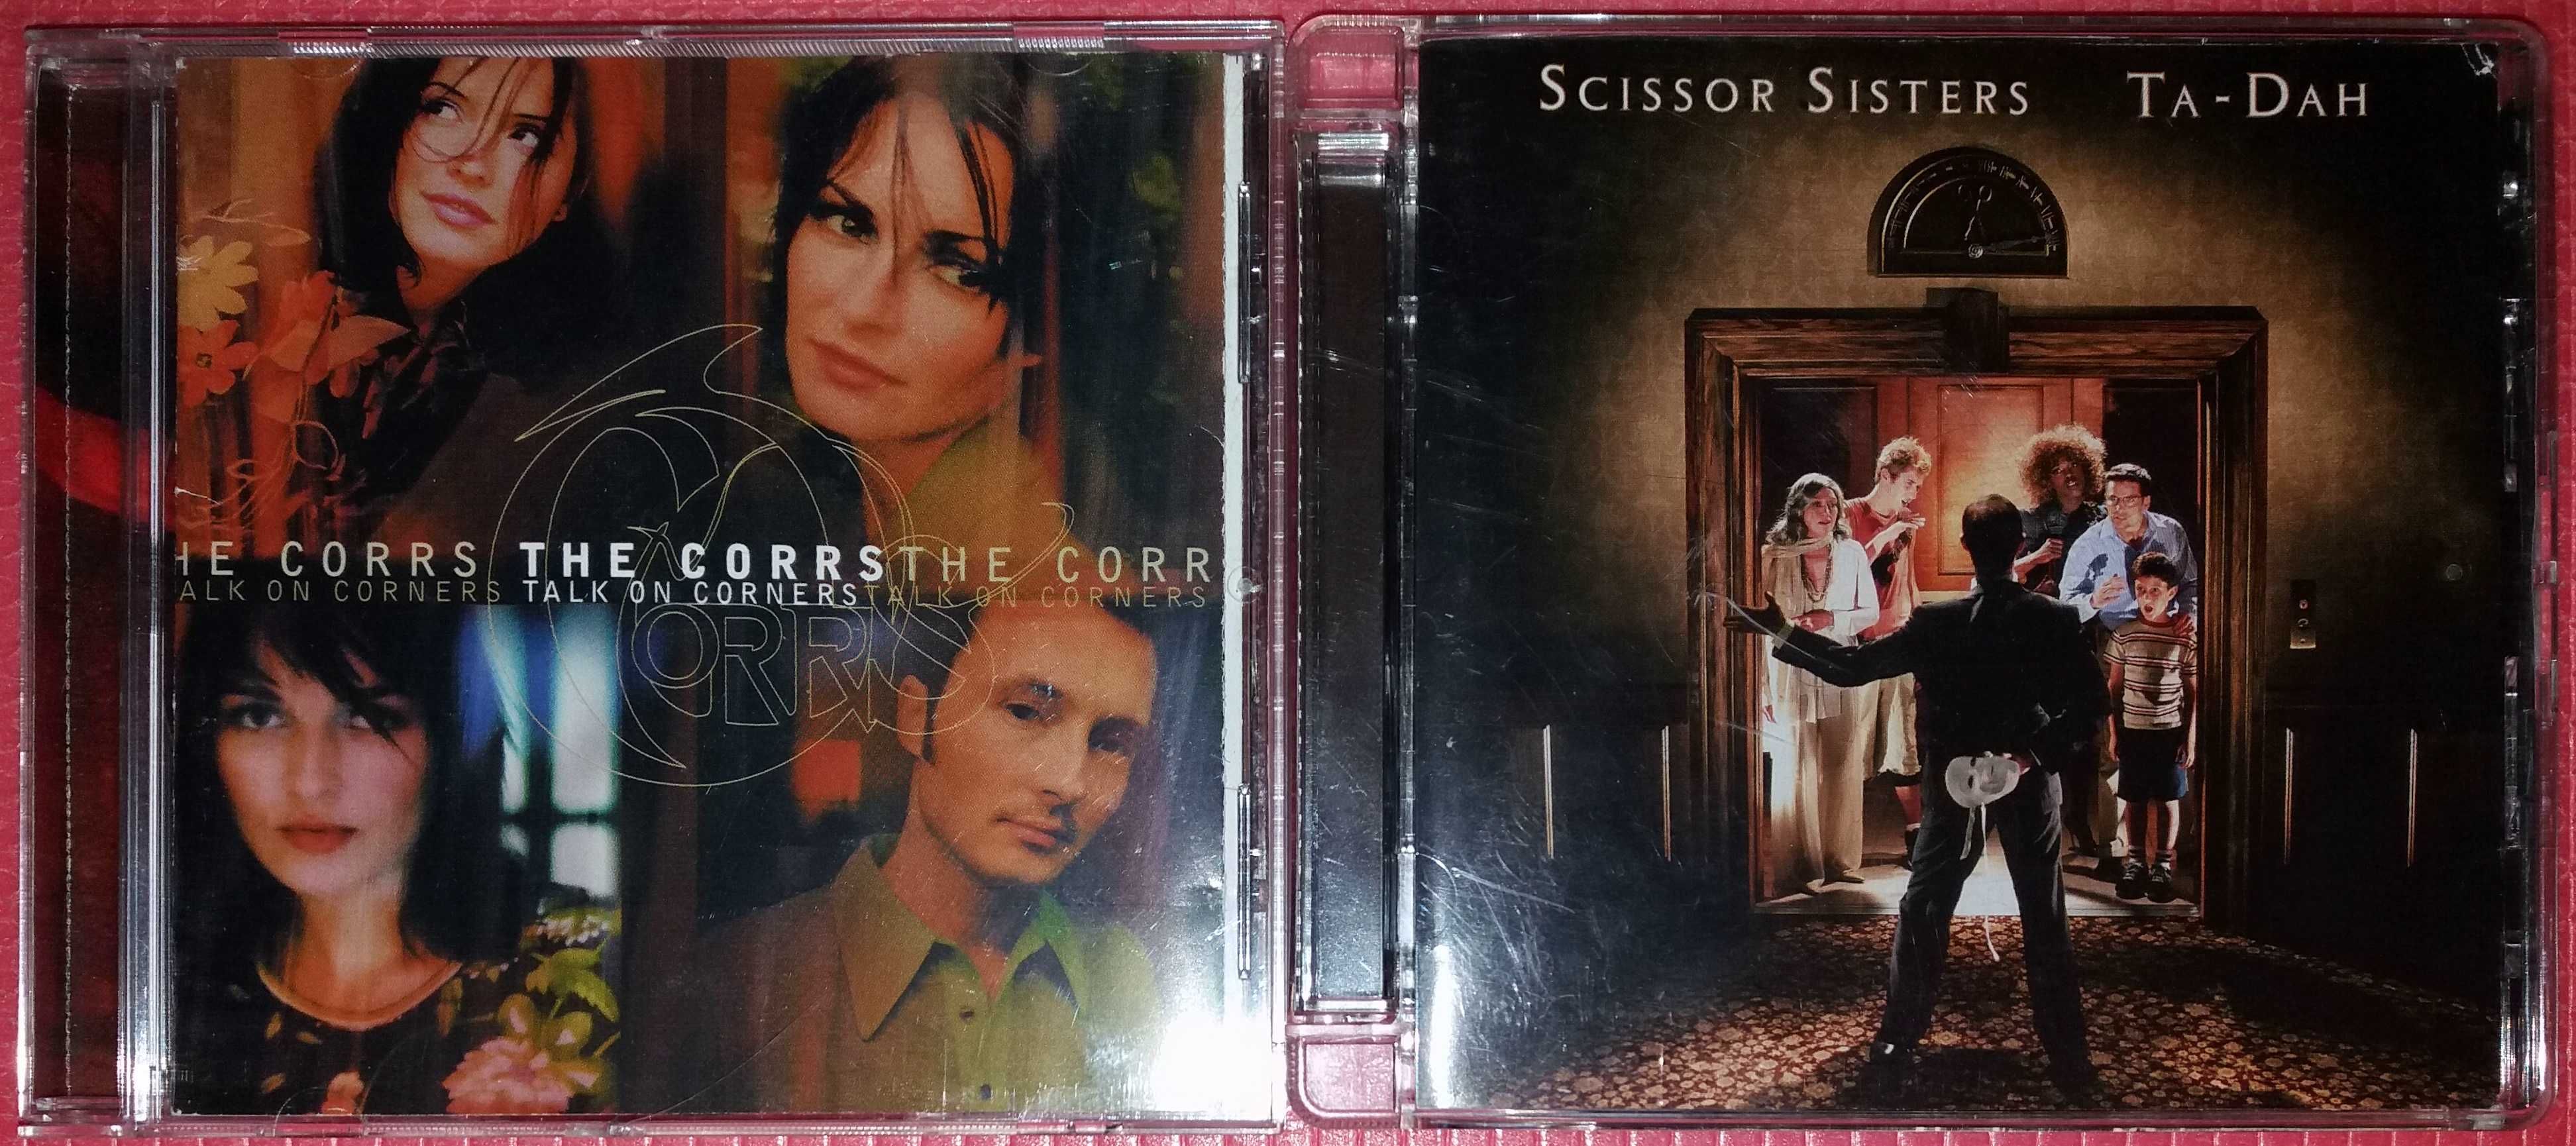 CD Stereophonics, The Corrs, Scissor Sisters